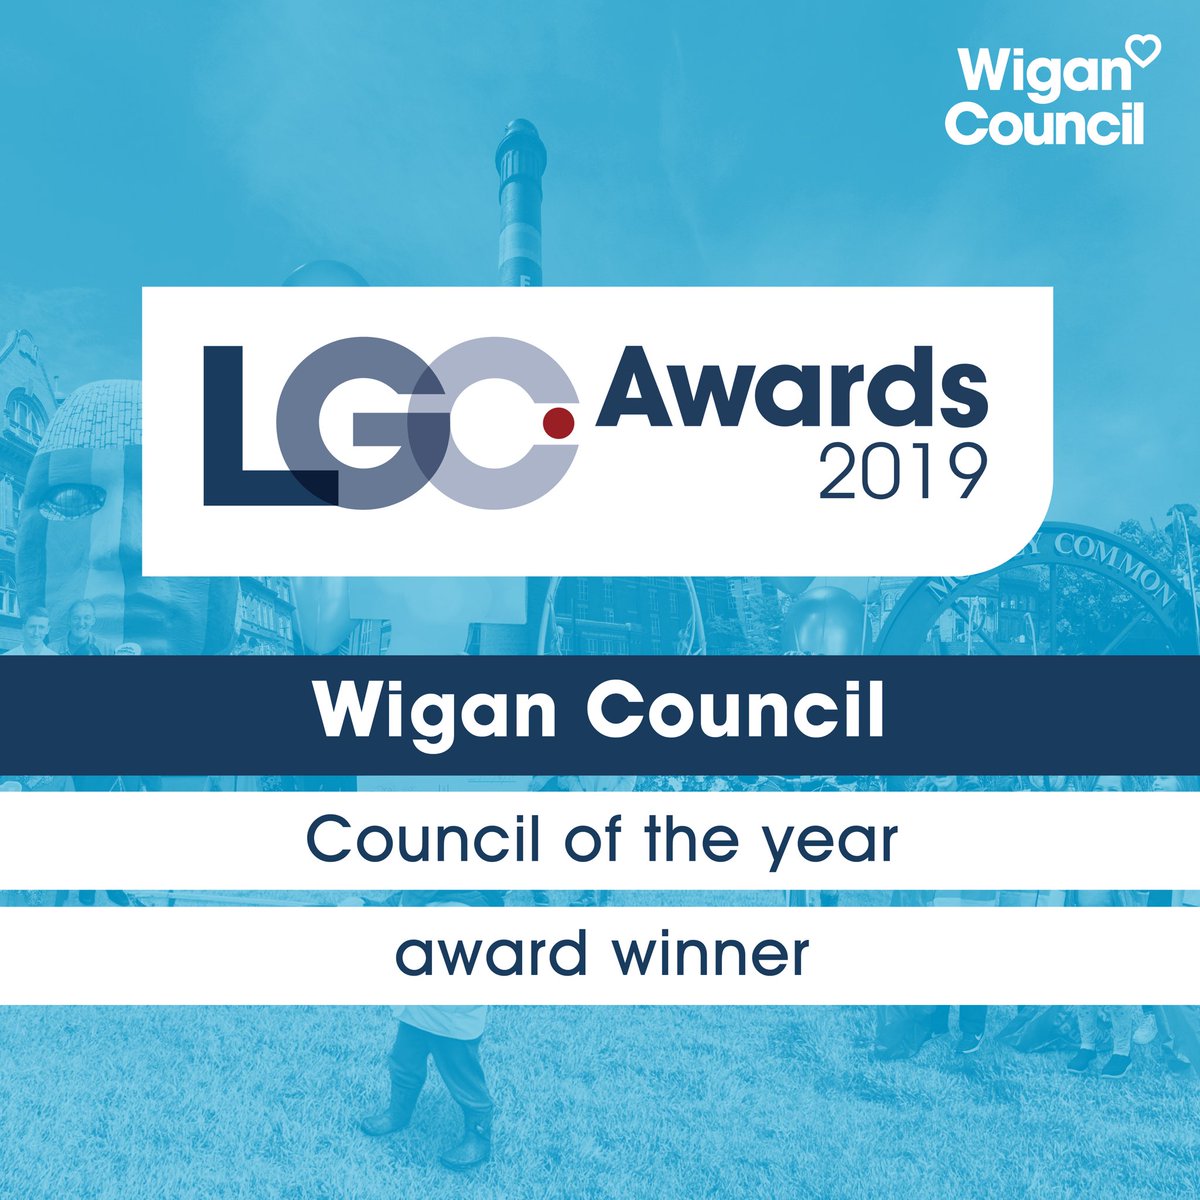 We are truly honoured to be named 'Council of the Year' at the #LGCAwards

A massive thank you to all our staff, councillors, partners & residents for being part of this brilliant success! #TheDeal 🤝

@LGCAwards